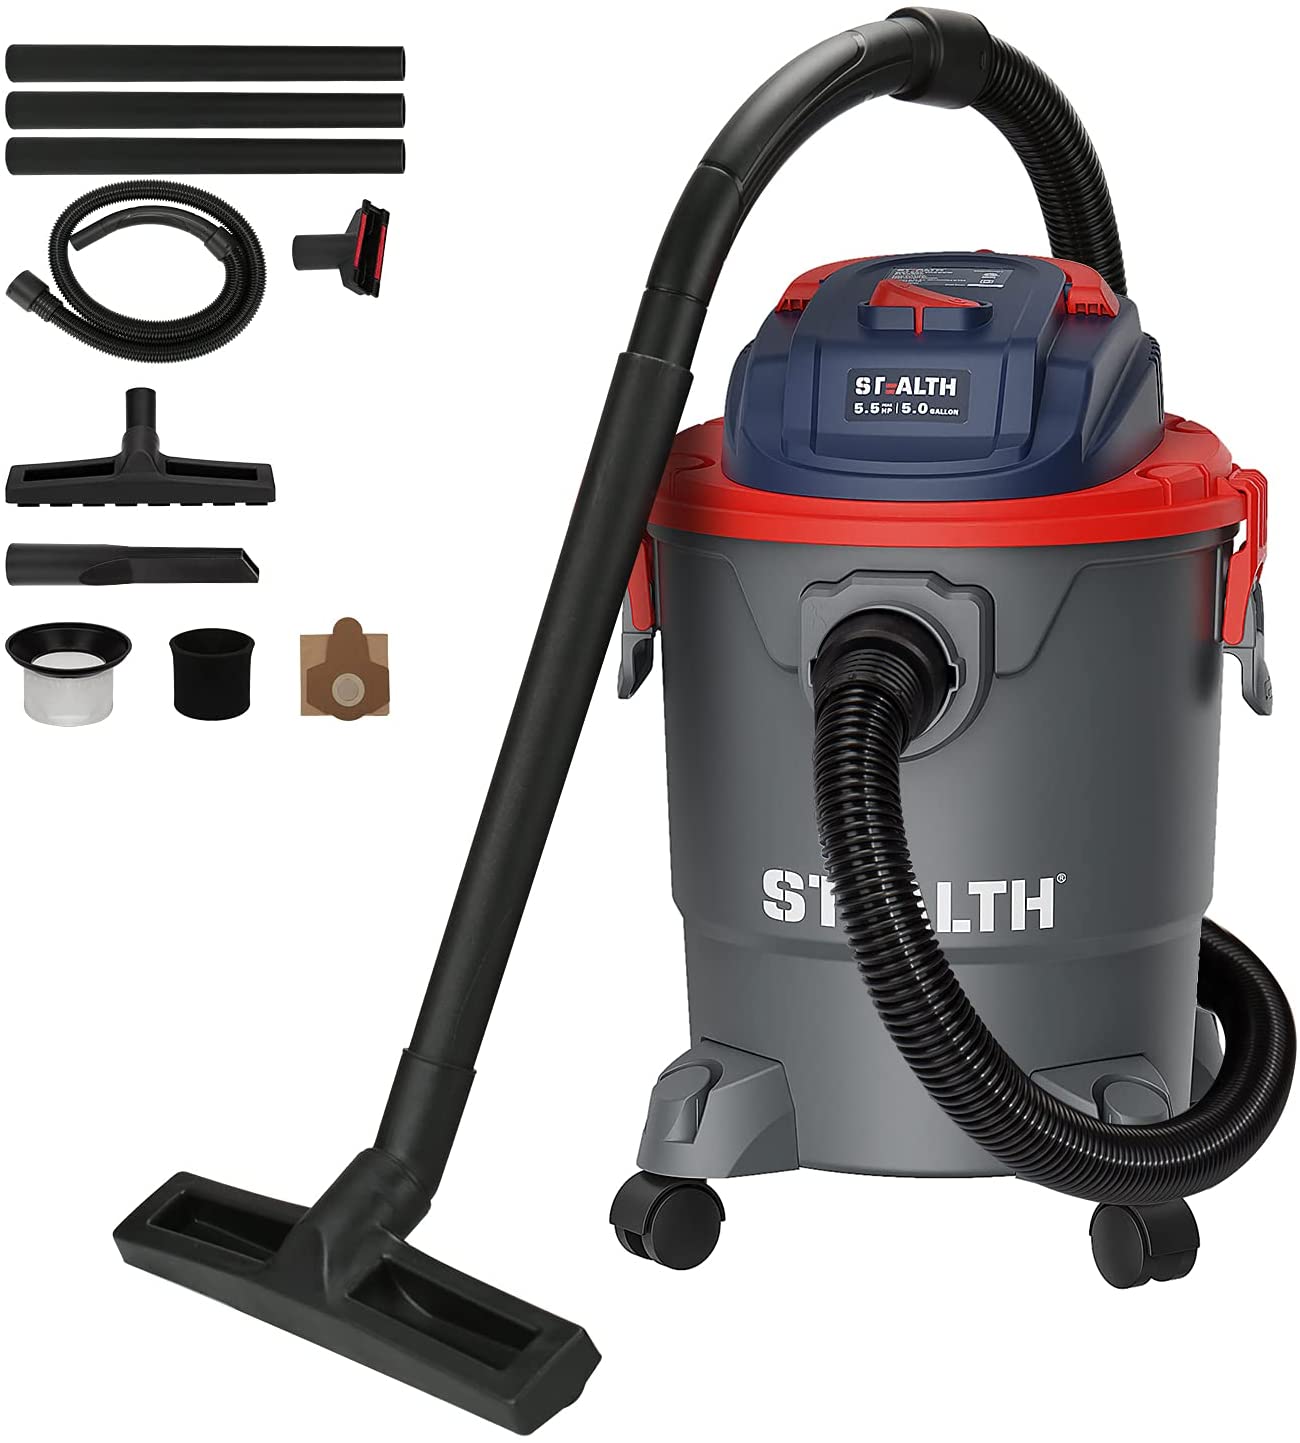 Stealth ECV05P1 Wet Dry Vacuum Cleaner, Shop Vacuum with Blower, 5 Gallon 5.5 Peak HP, Portable Shop Vacuum with Attachments $69.99